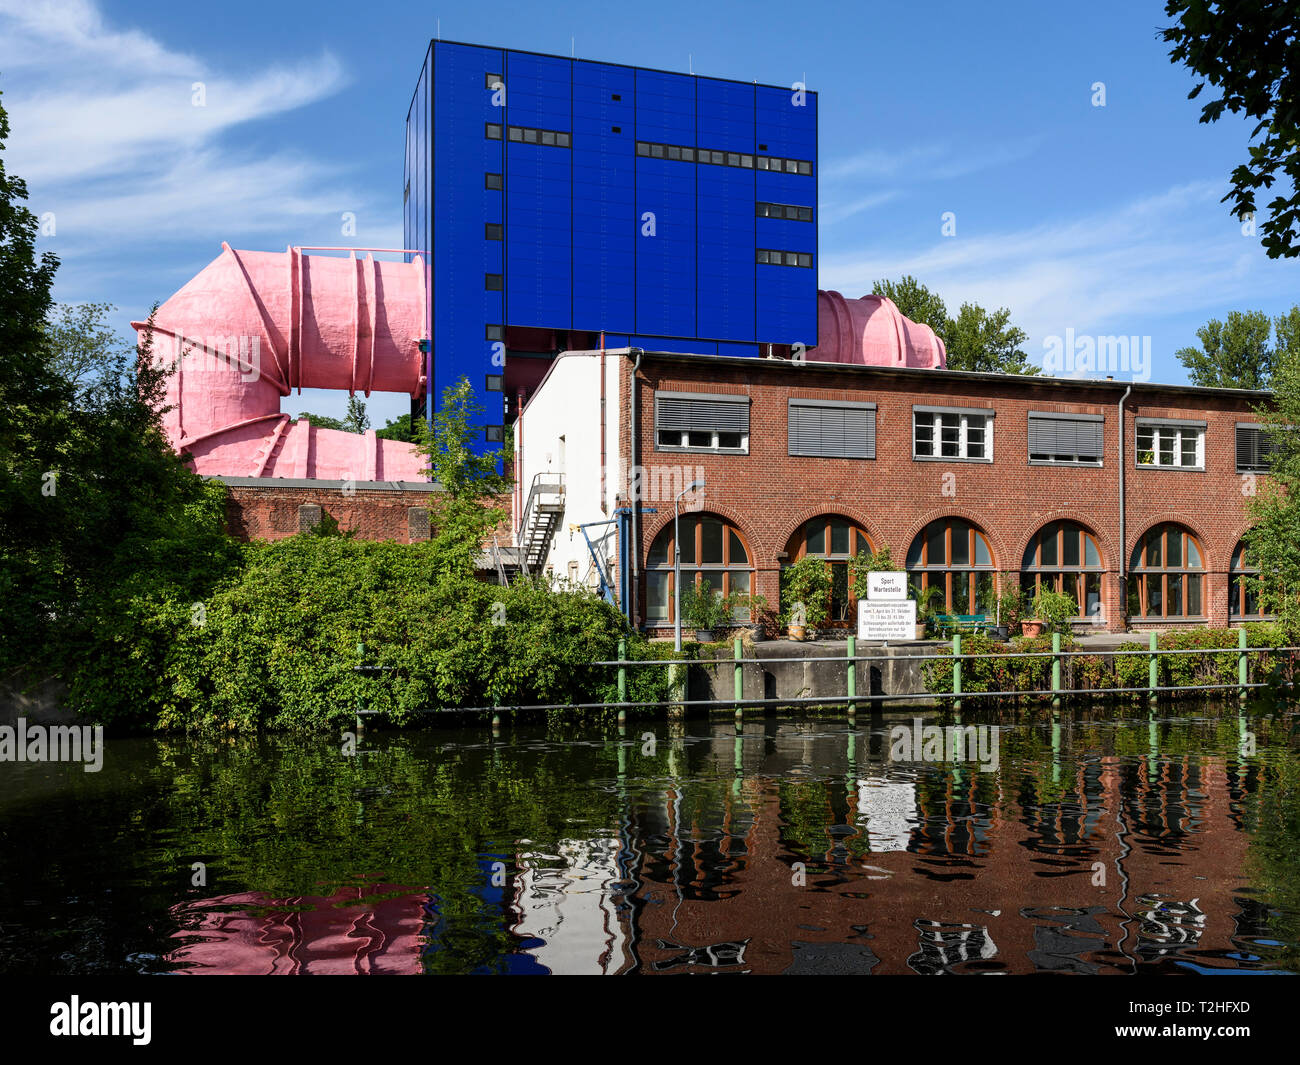 Berlin. Germany. Umlauftank 2, designed by architect Ludwig Leo (1924-2012) in 1975.   The Umlauftank 2 is a research complex which was built by the R Stock Photo